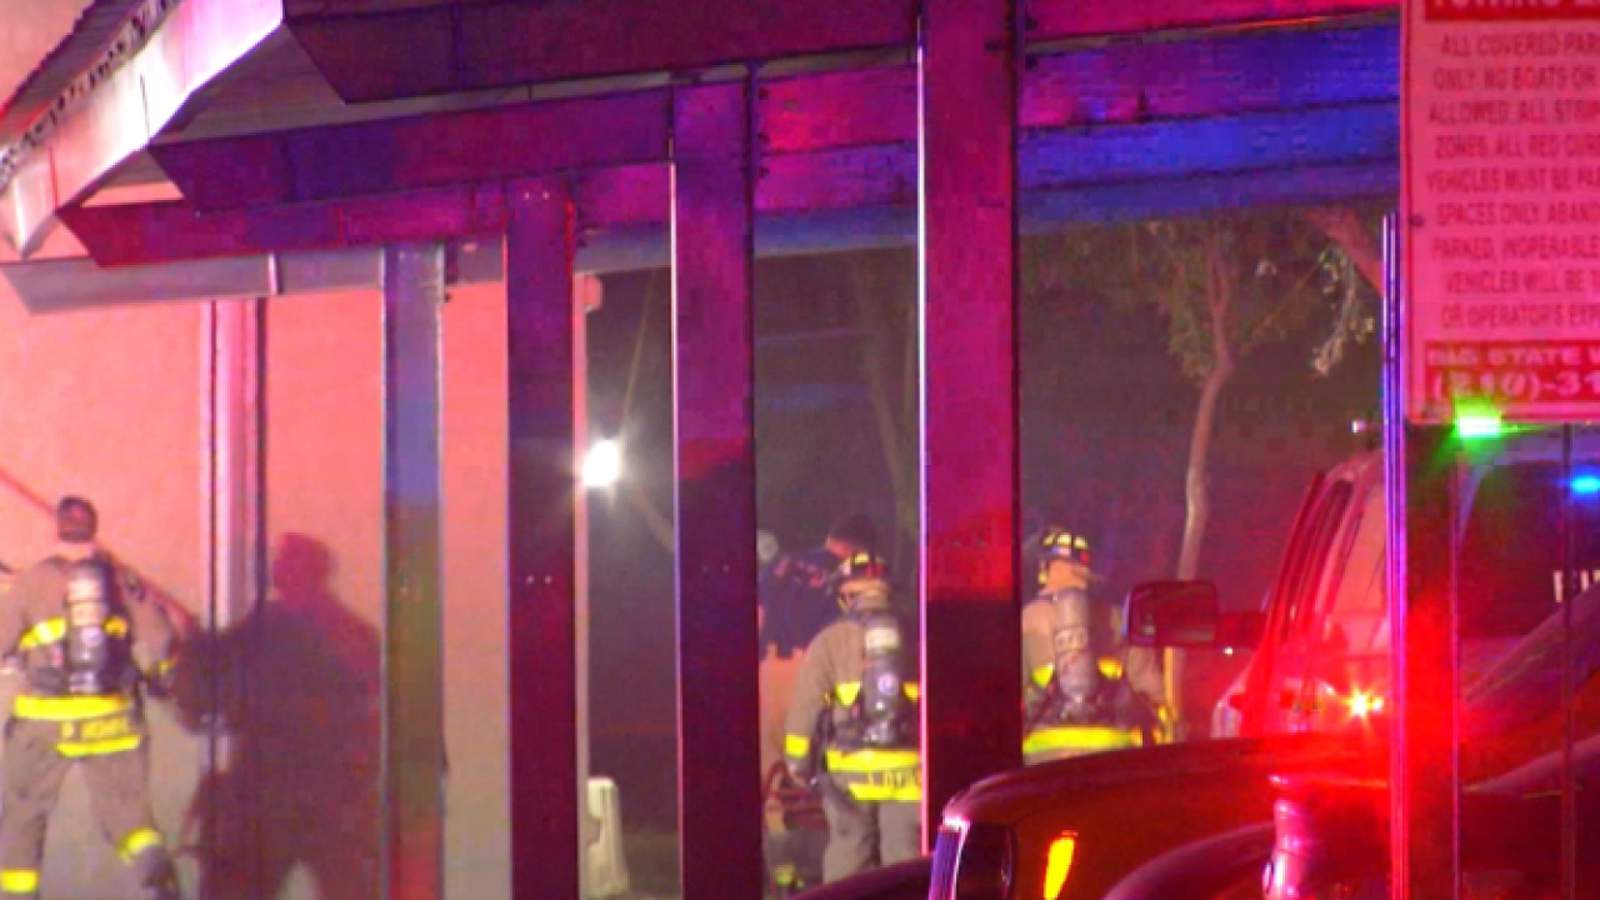 Apartment fire likely started by homeless people, SAFD says